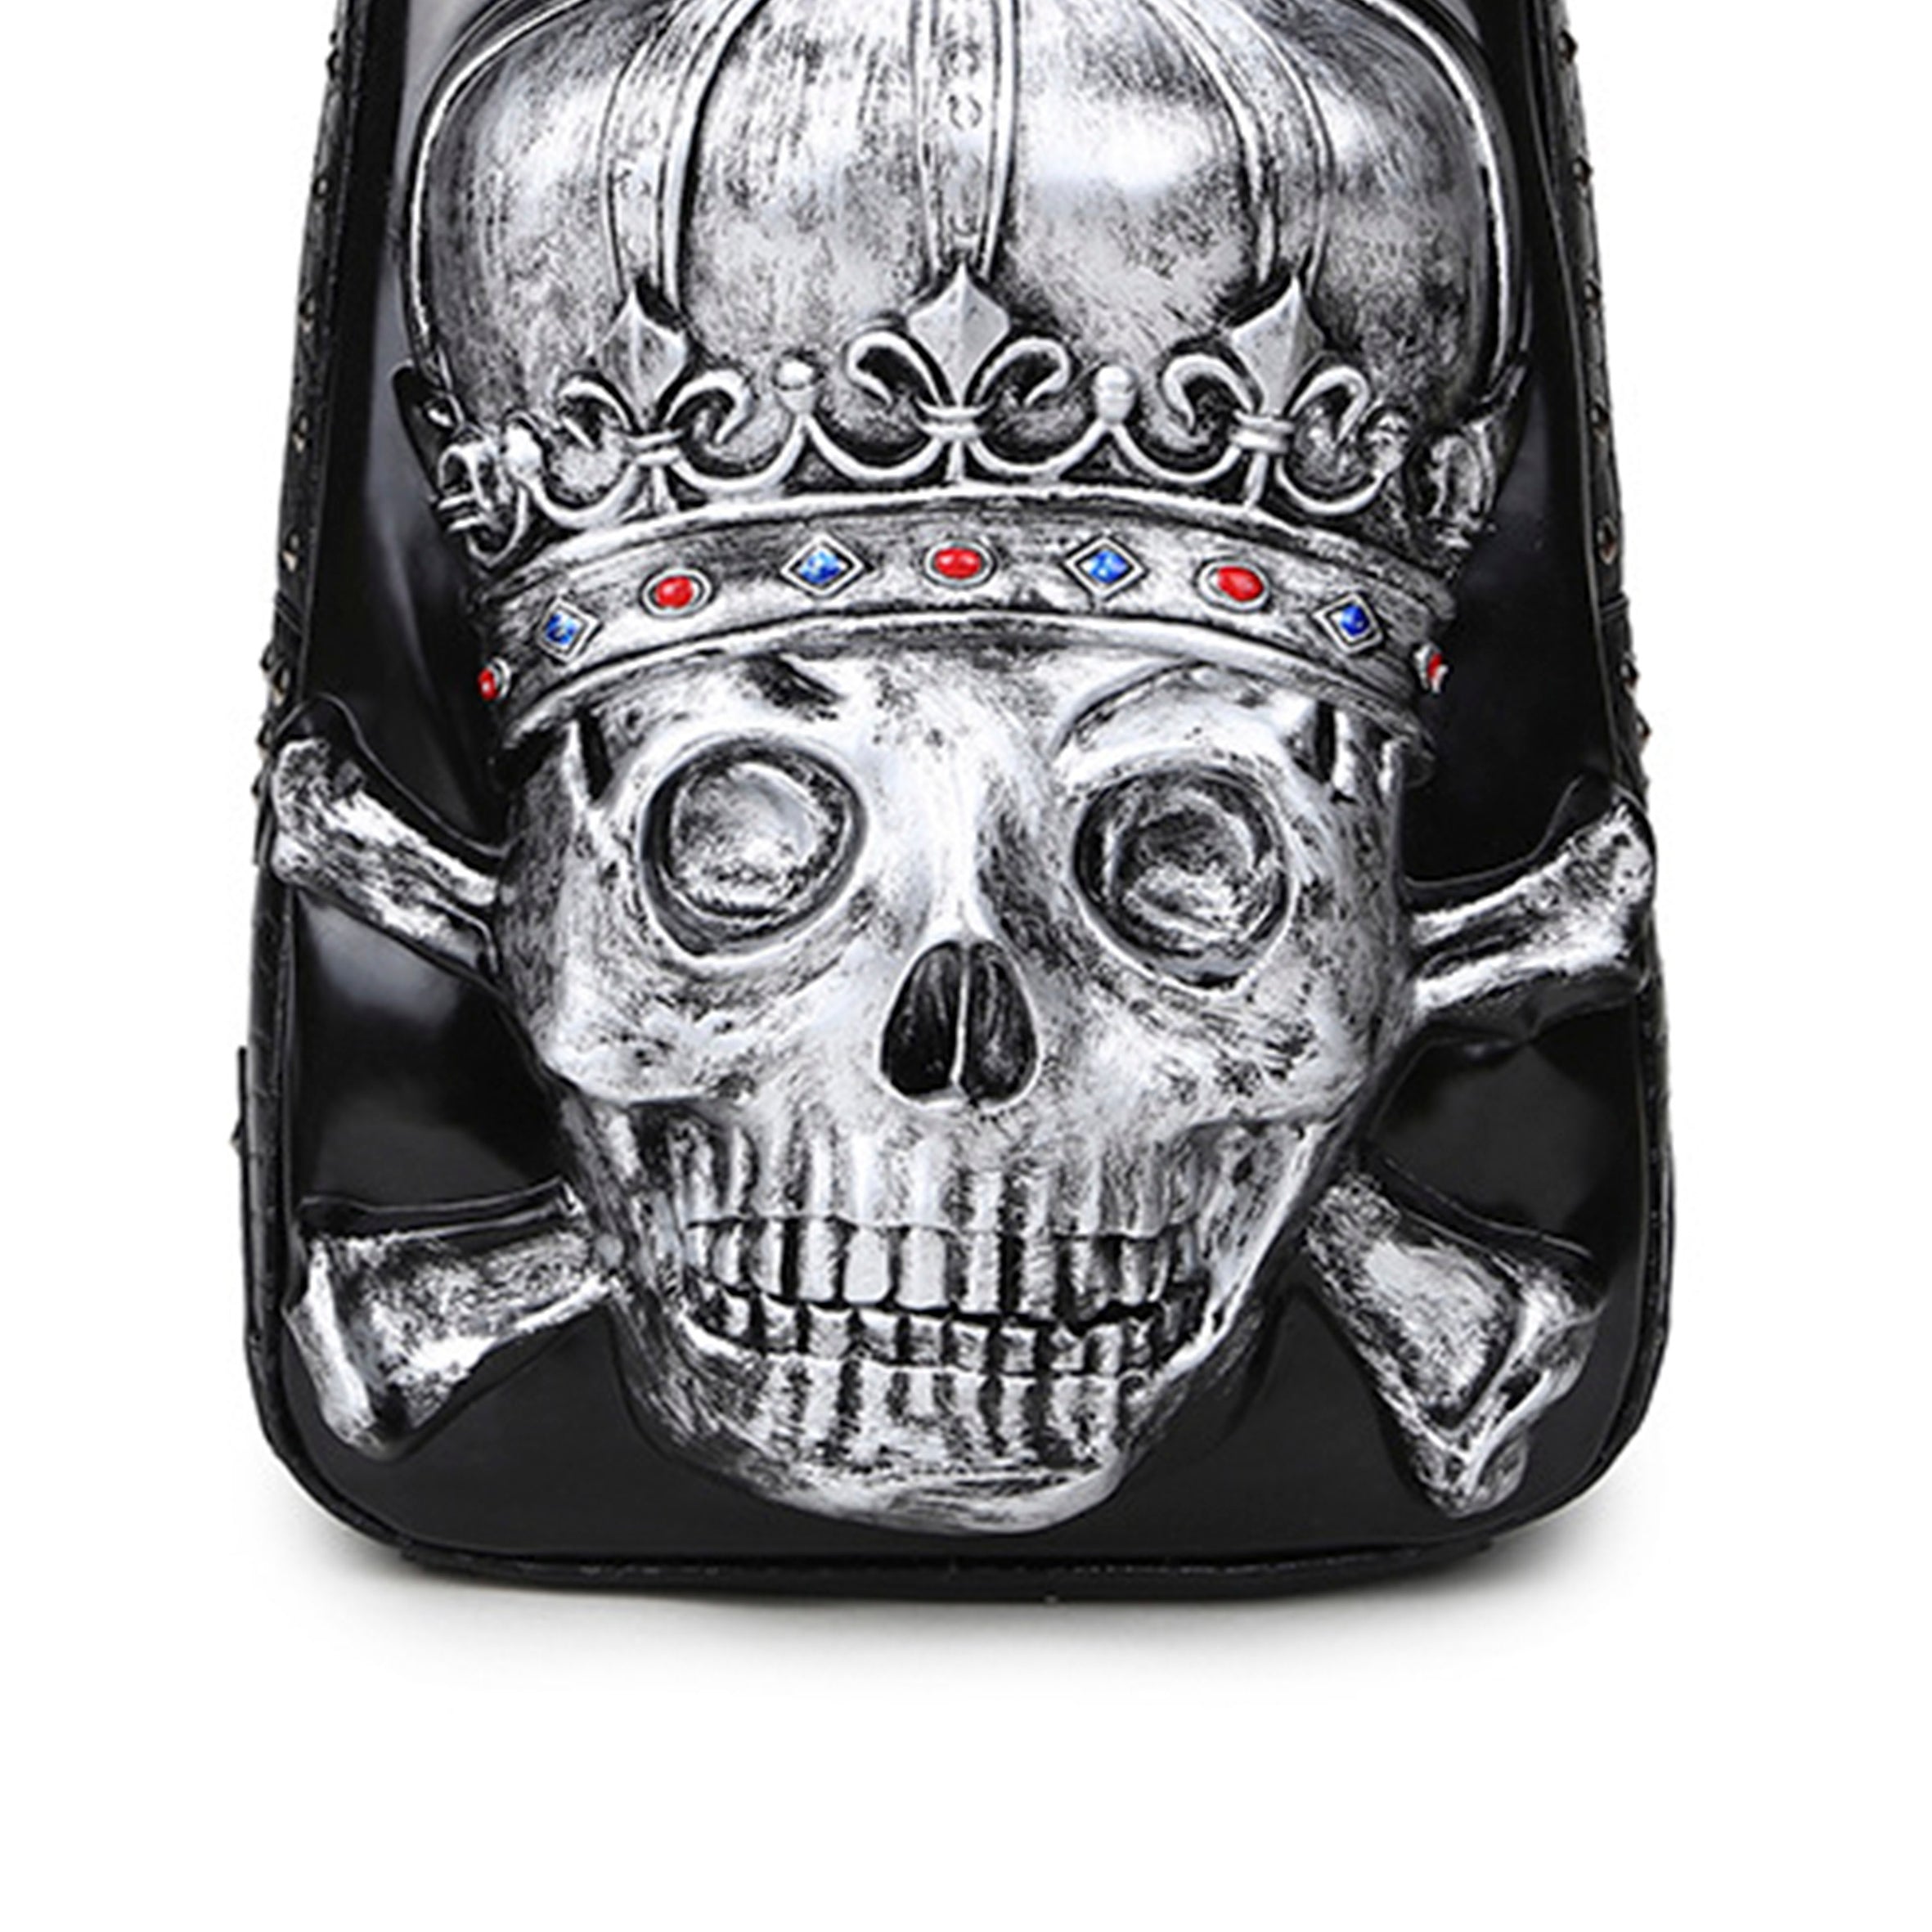 Skull Alloy Pu Leather Backpack HB1103